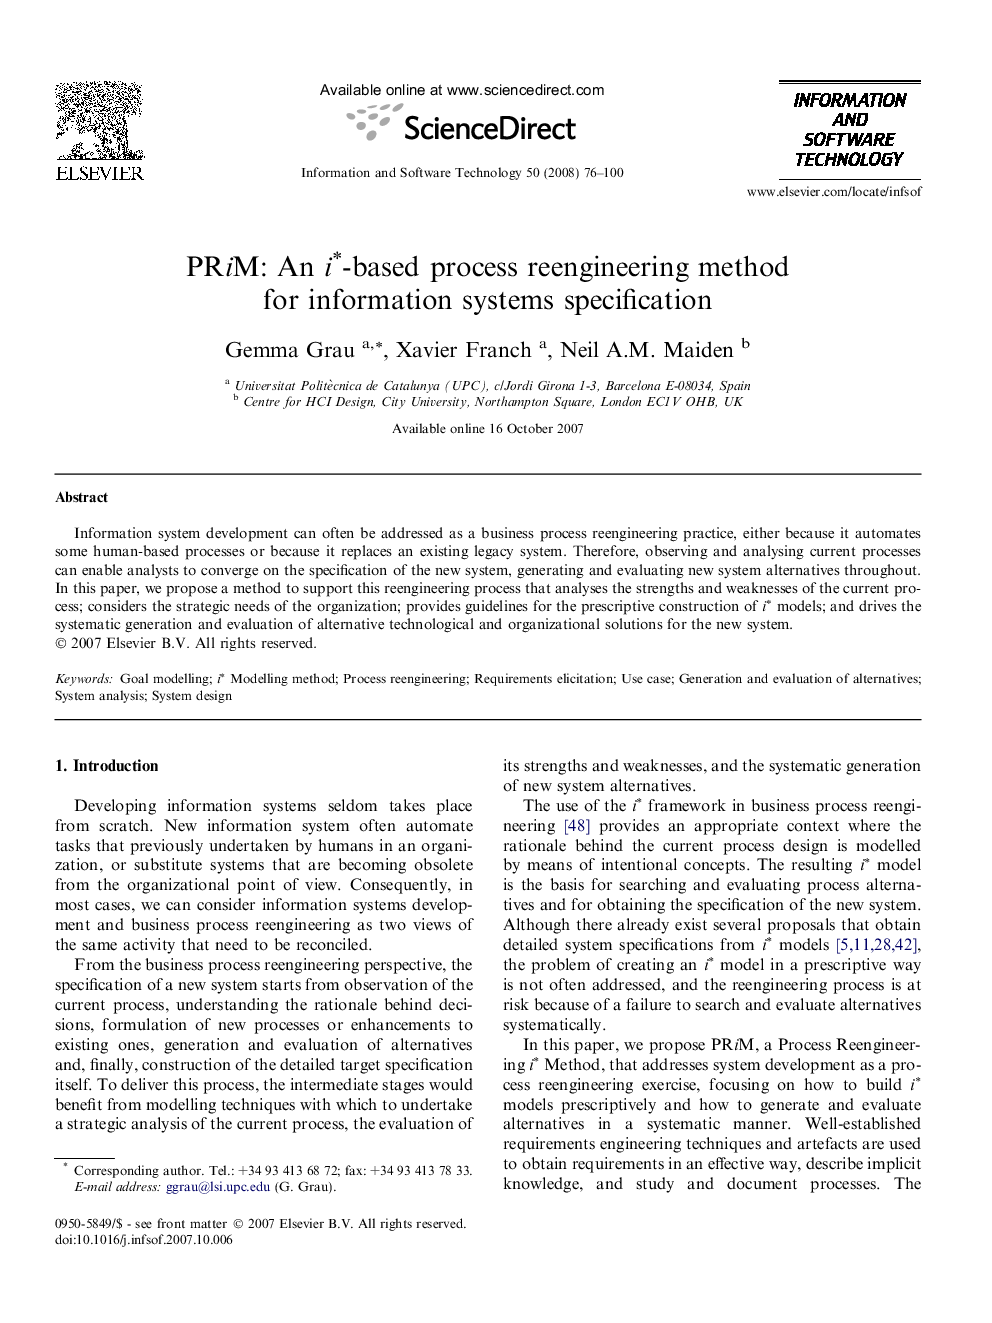 PRiM: An i∗-based process reengineering method for information systems specification